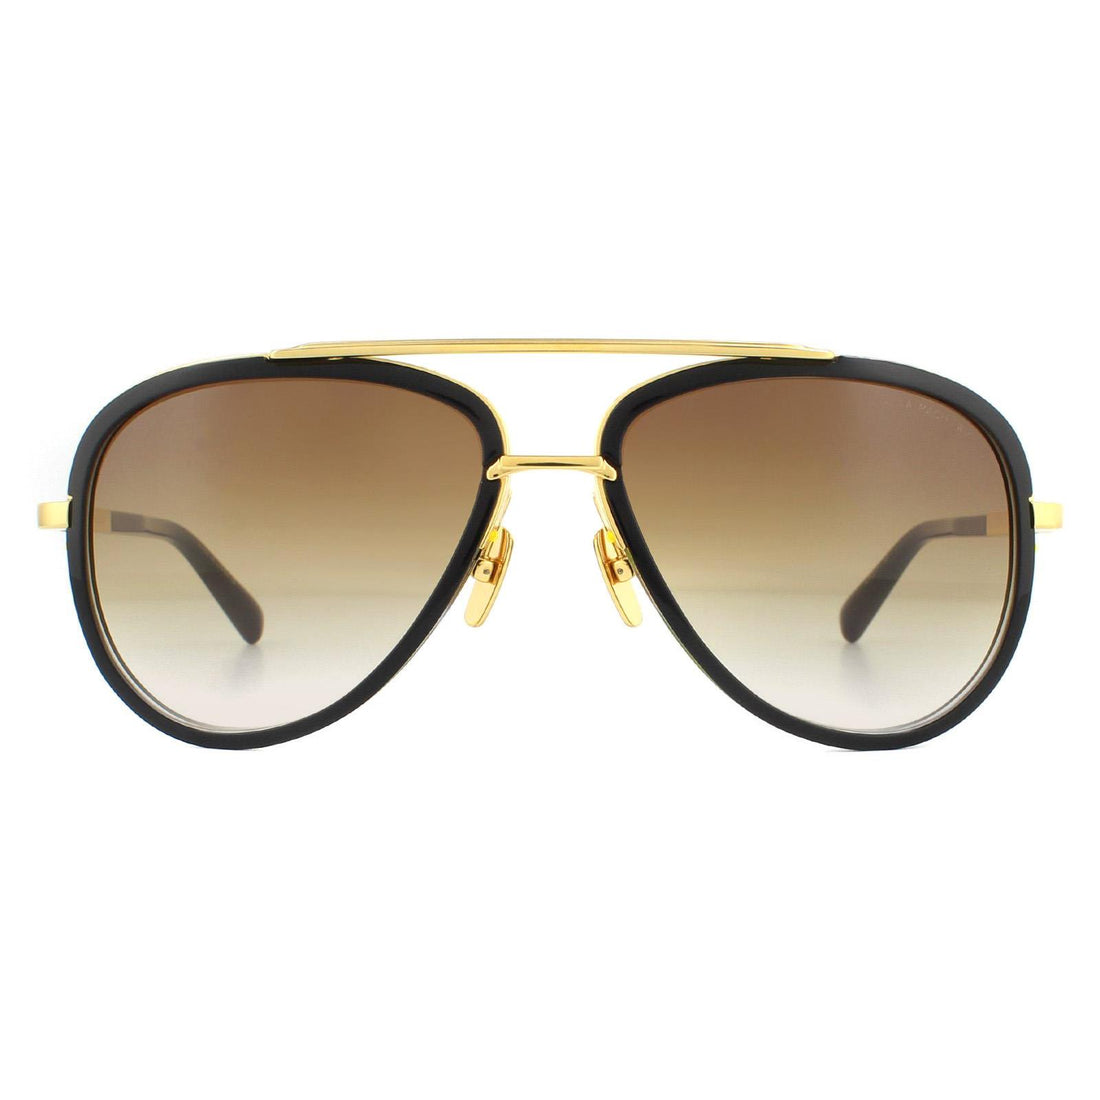 Dita Mach Two Sunglasses Black and Shiny 18K Gold / Brown Gradient